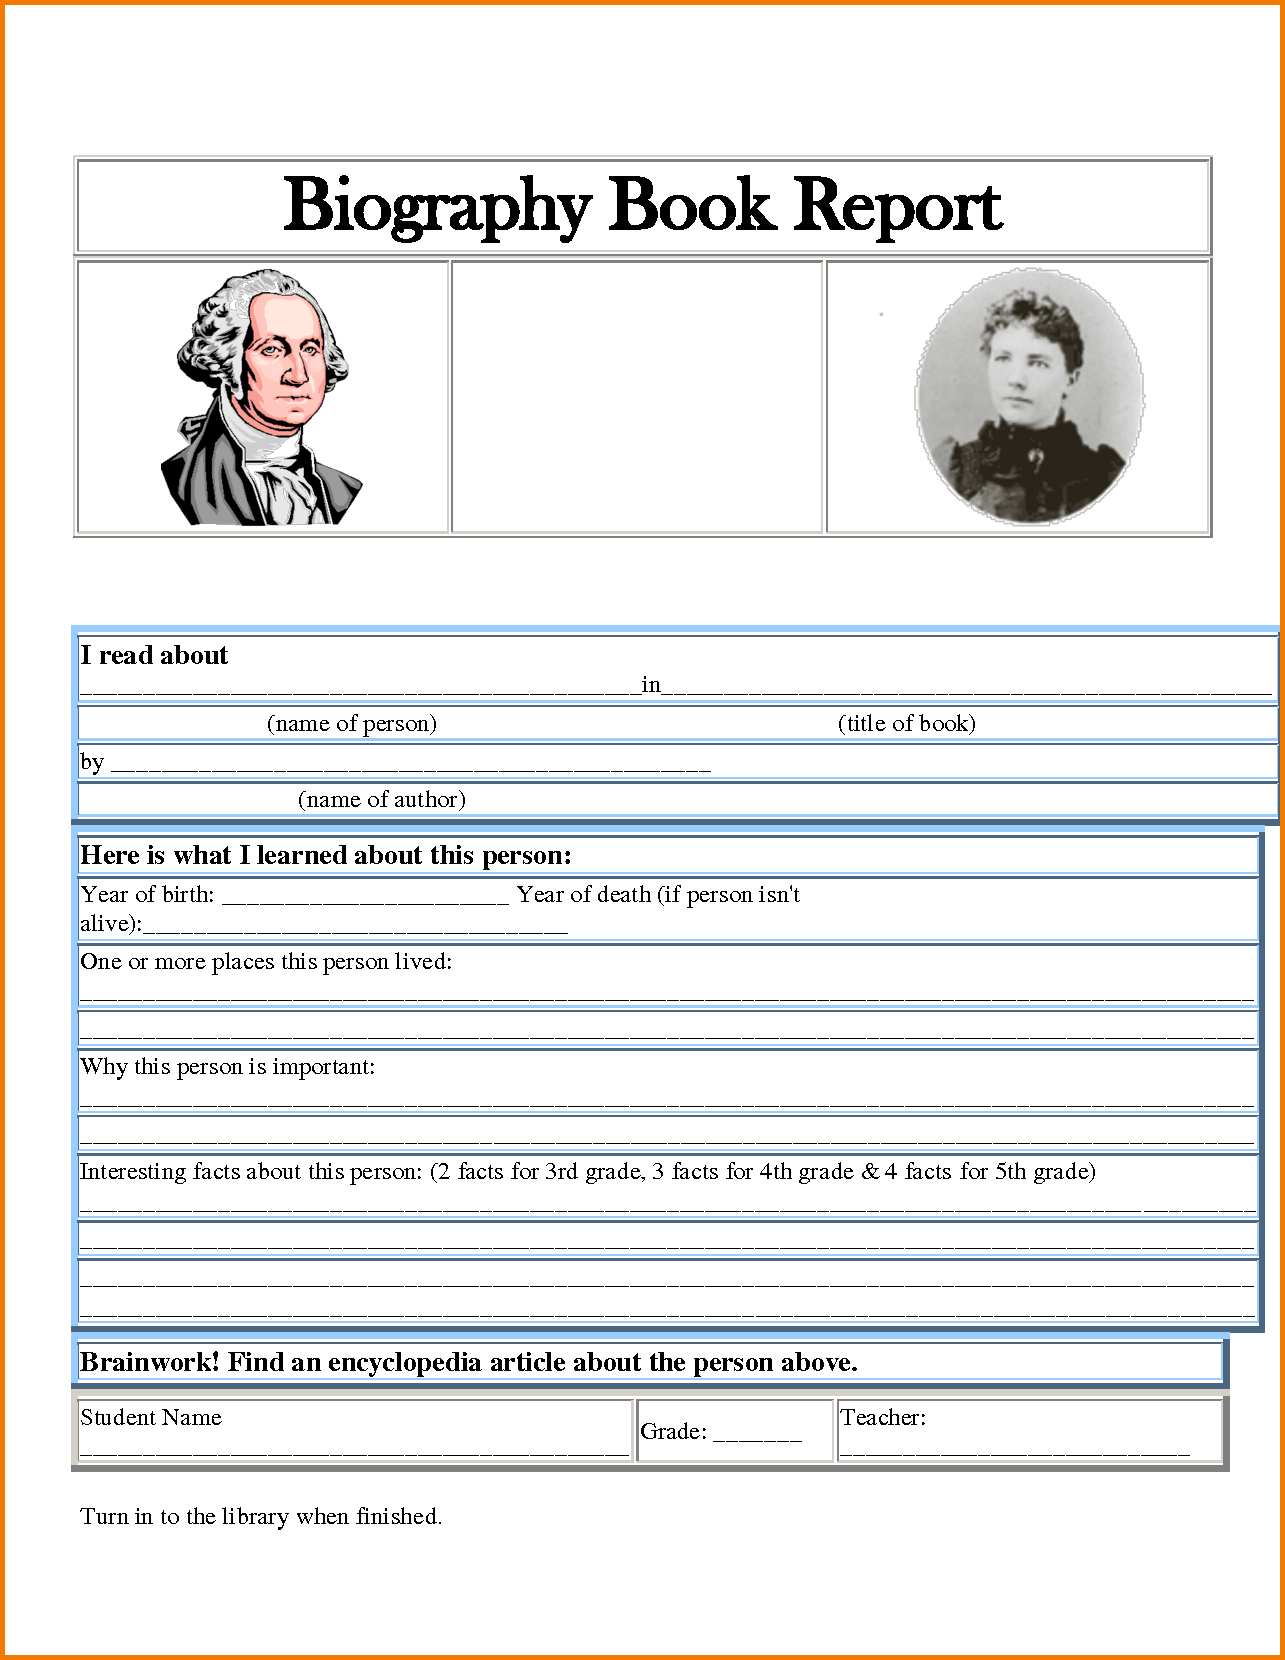 Biography Worksheet Template | Printable Worksheets And For Biography Book Report Template